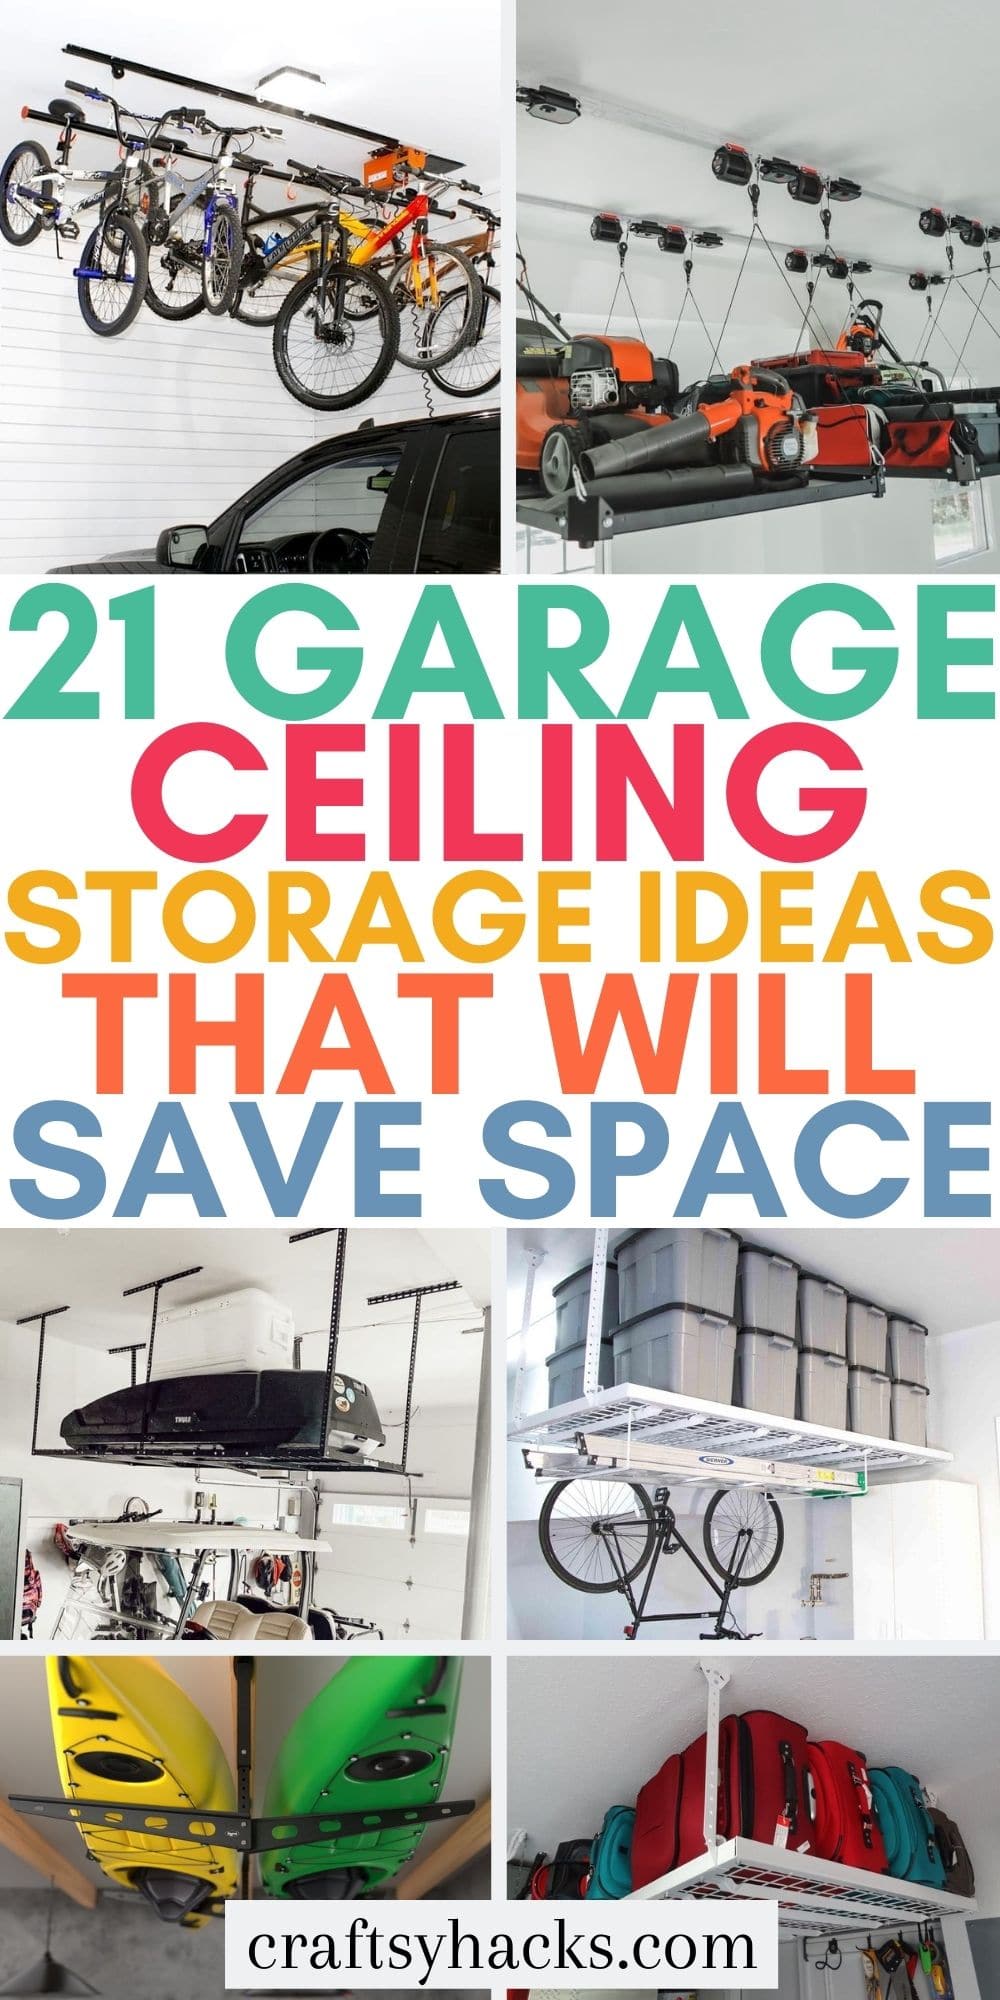 21 Garage Ceiling Storage Ideas to Save You Space - Craftsy Hacks